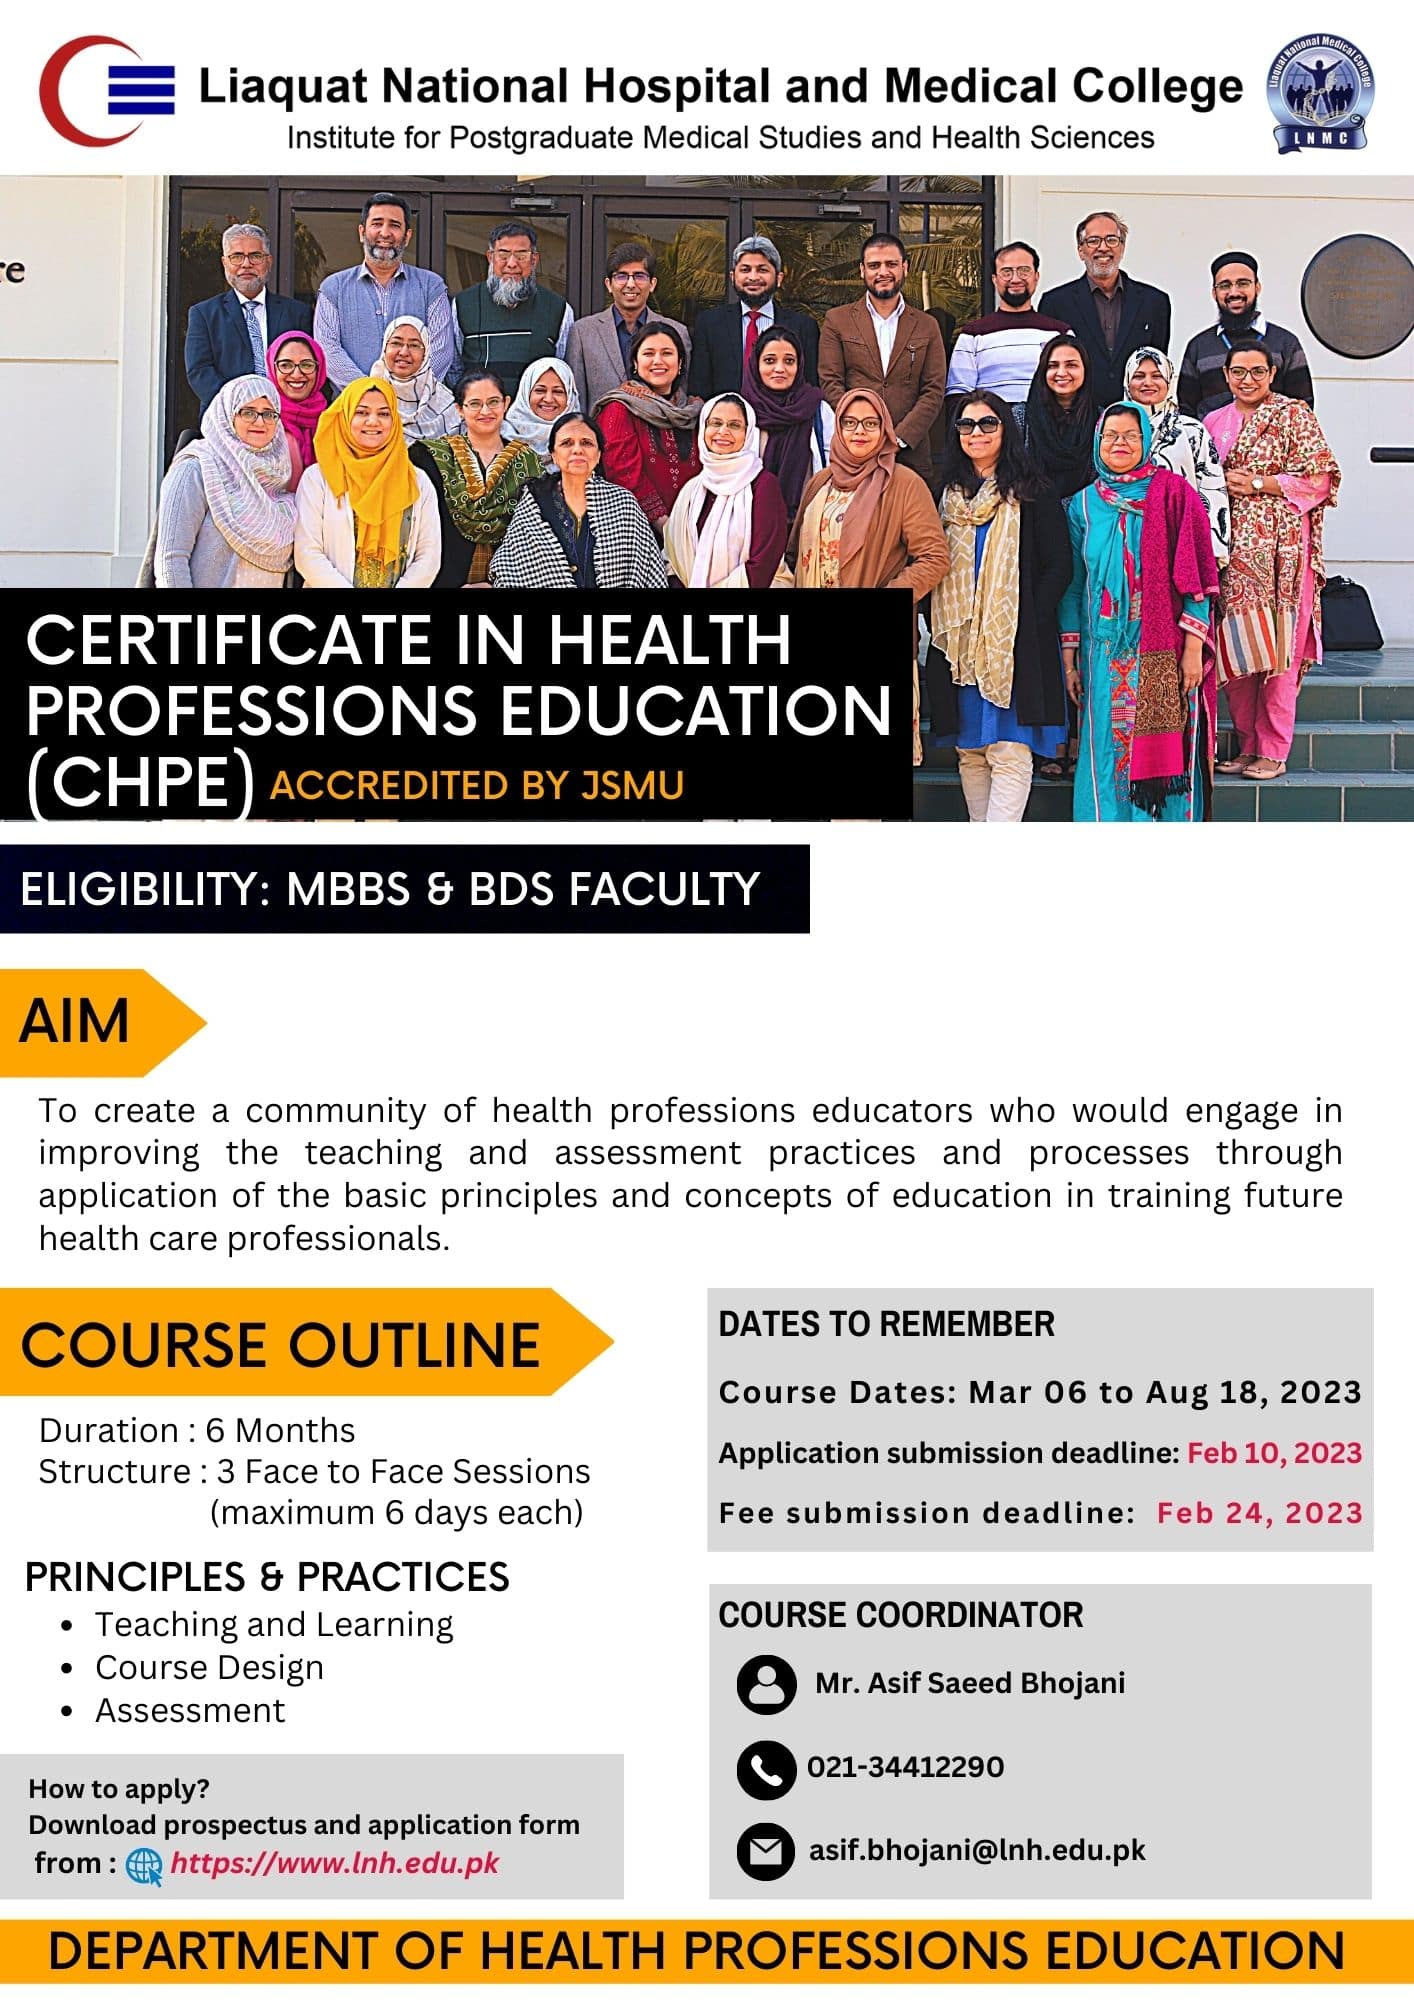 Certificate in Health Professions Education (CHPE)